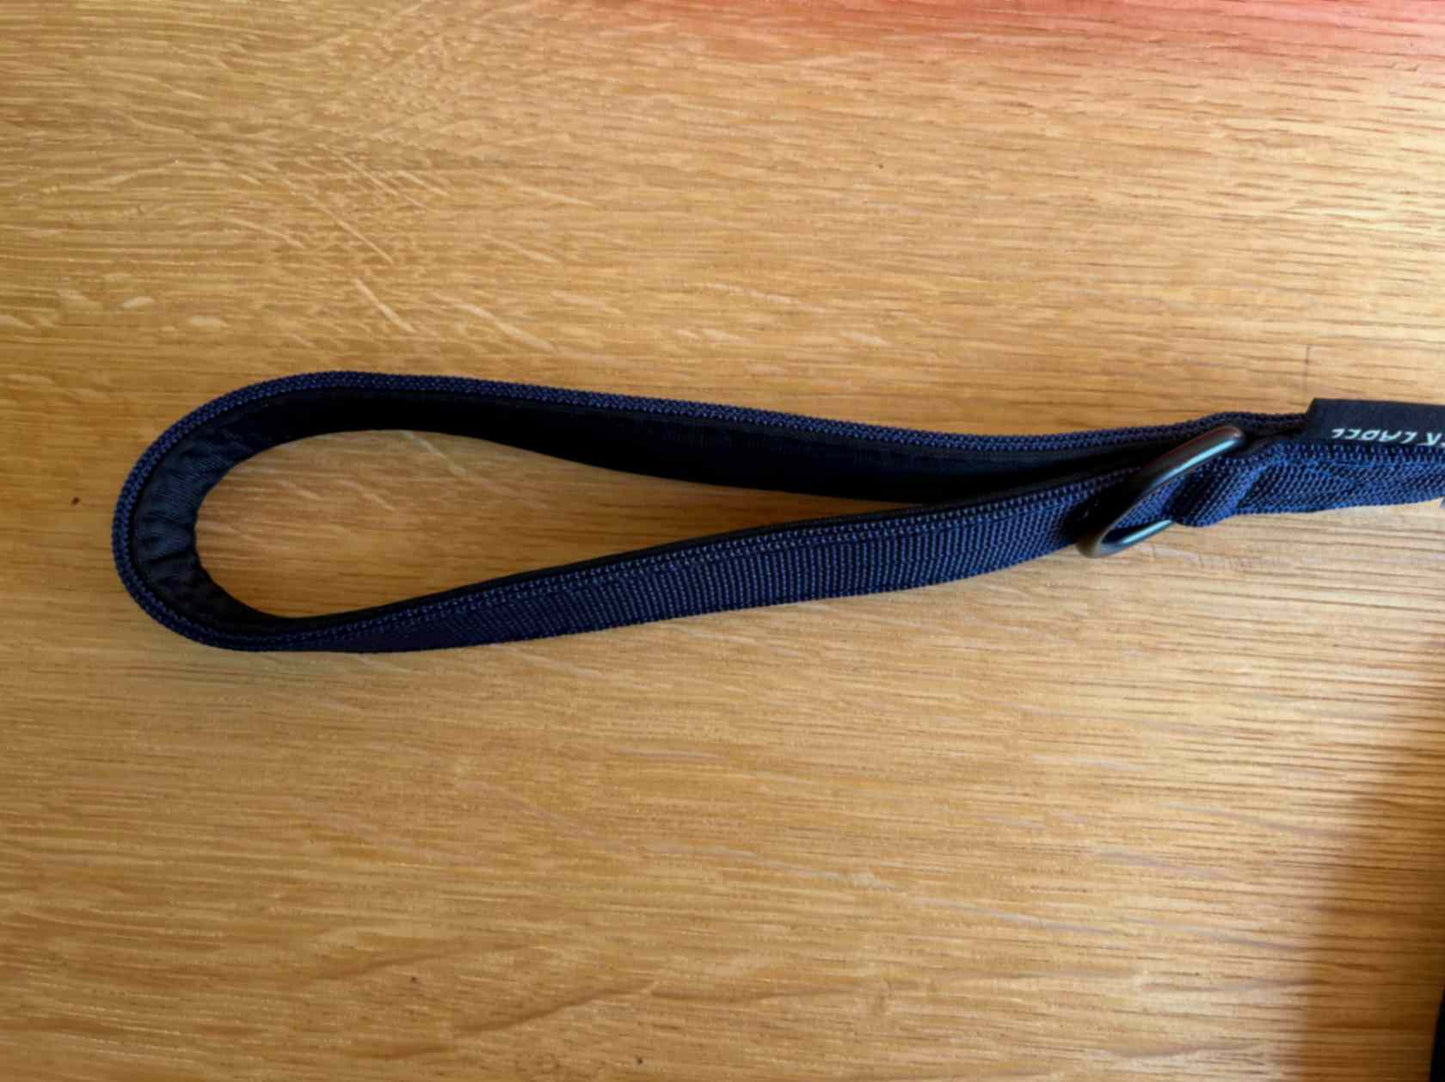 Handle of a navy dog leash